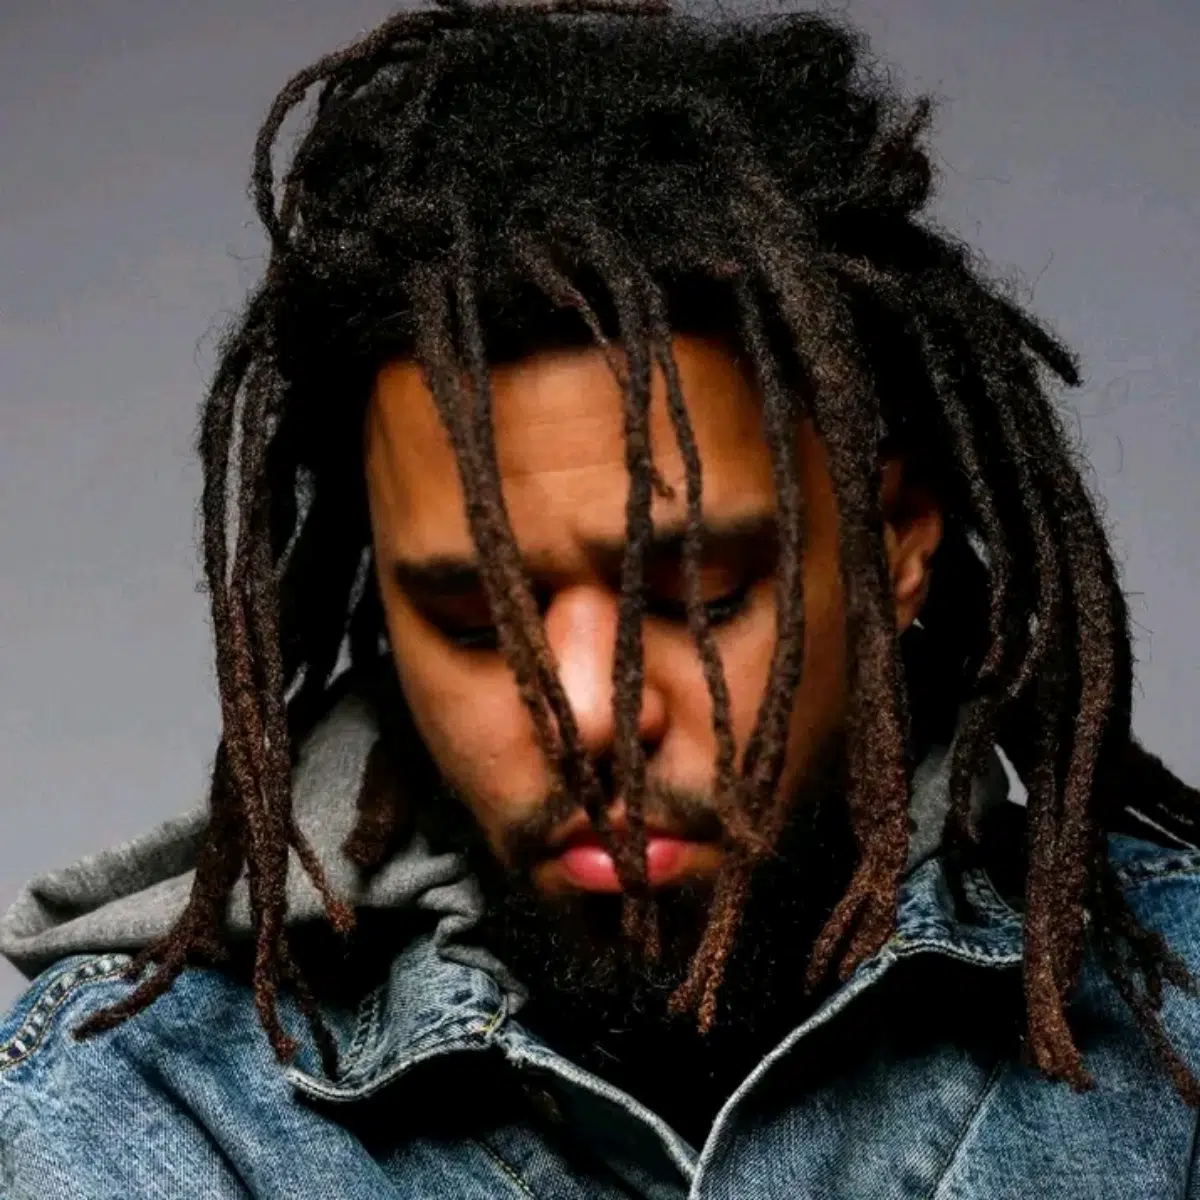 DOWNLOAD: J. Cole – “Kevin’s Heart” Video + Audio Mp3